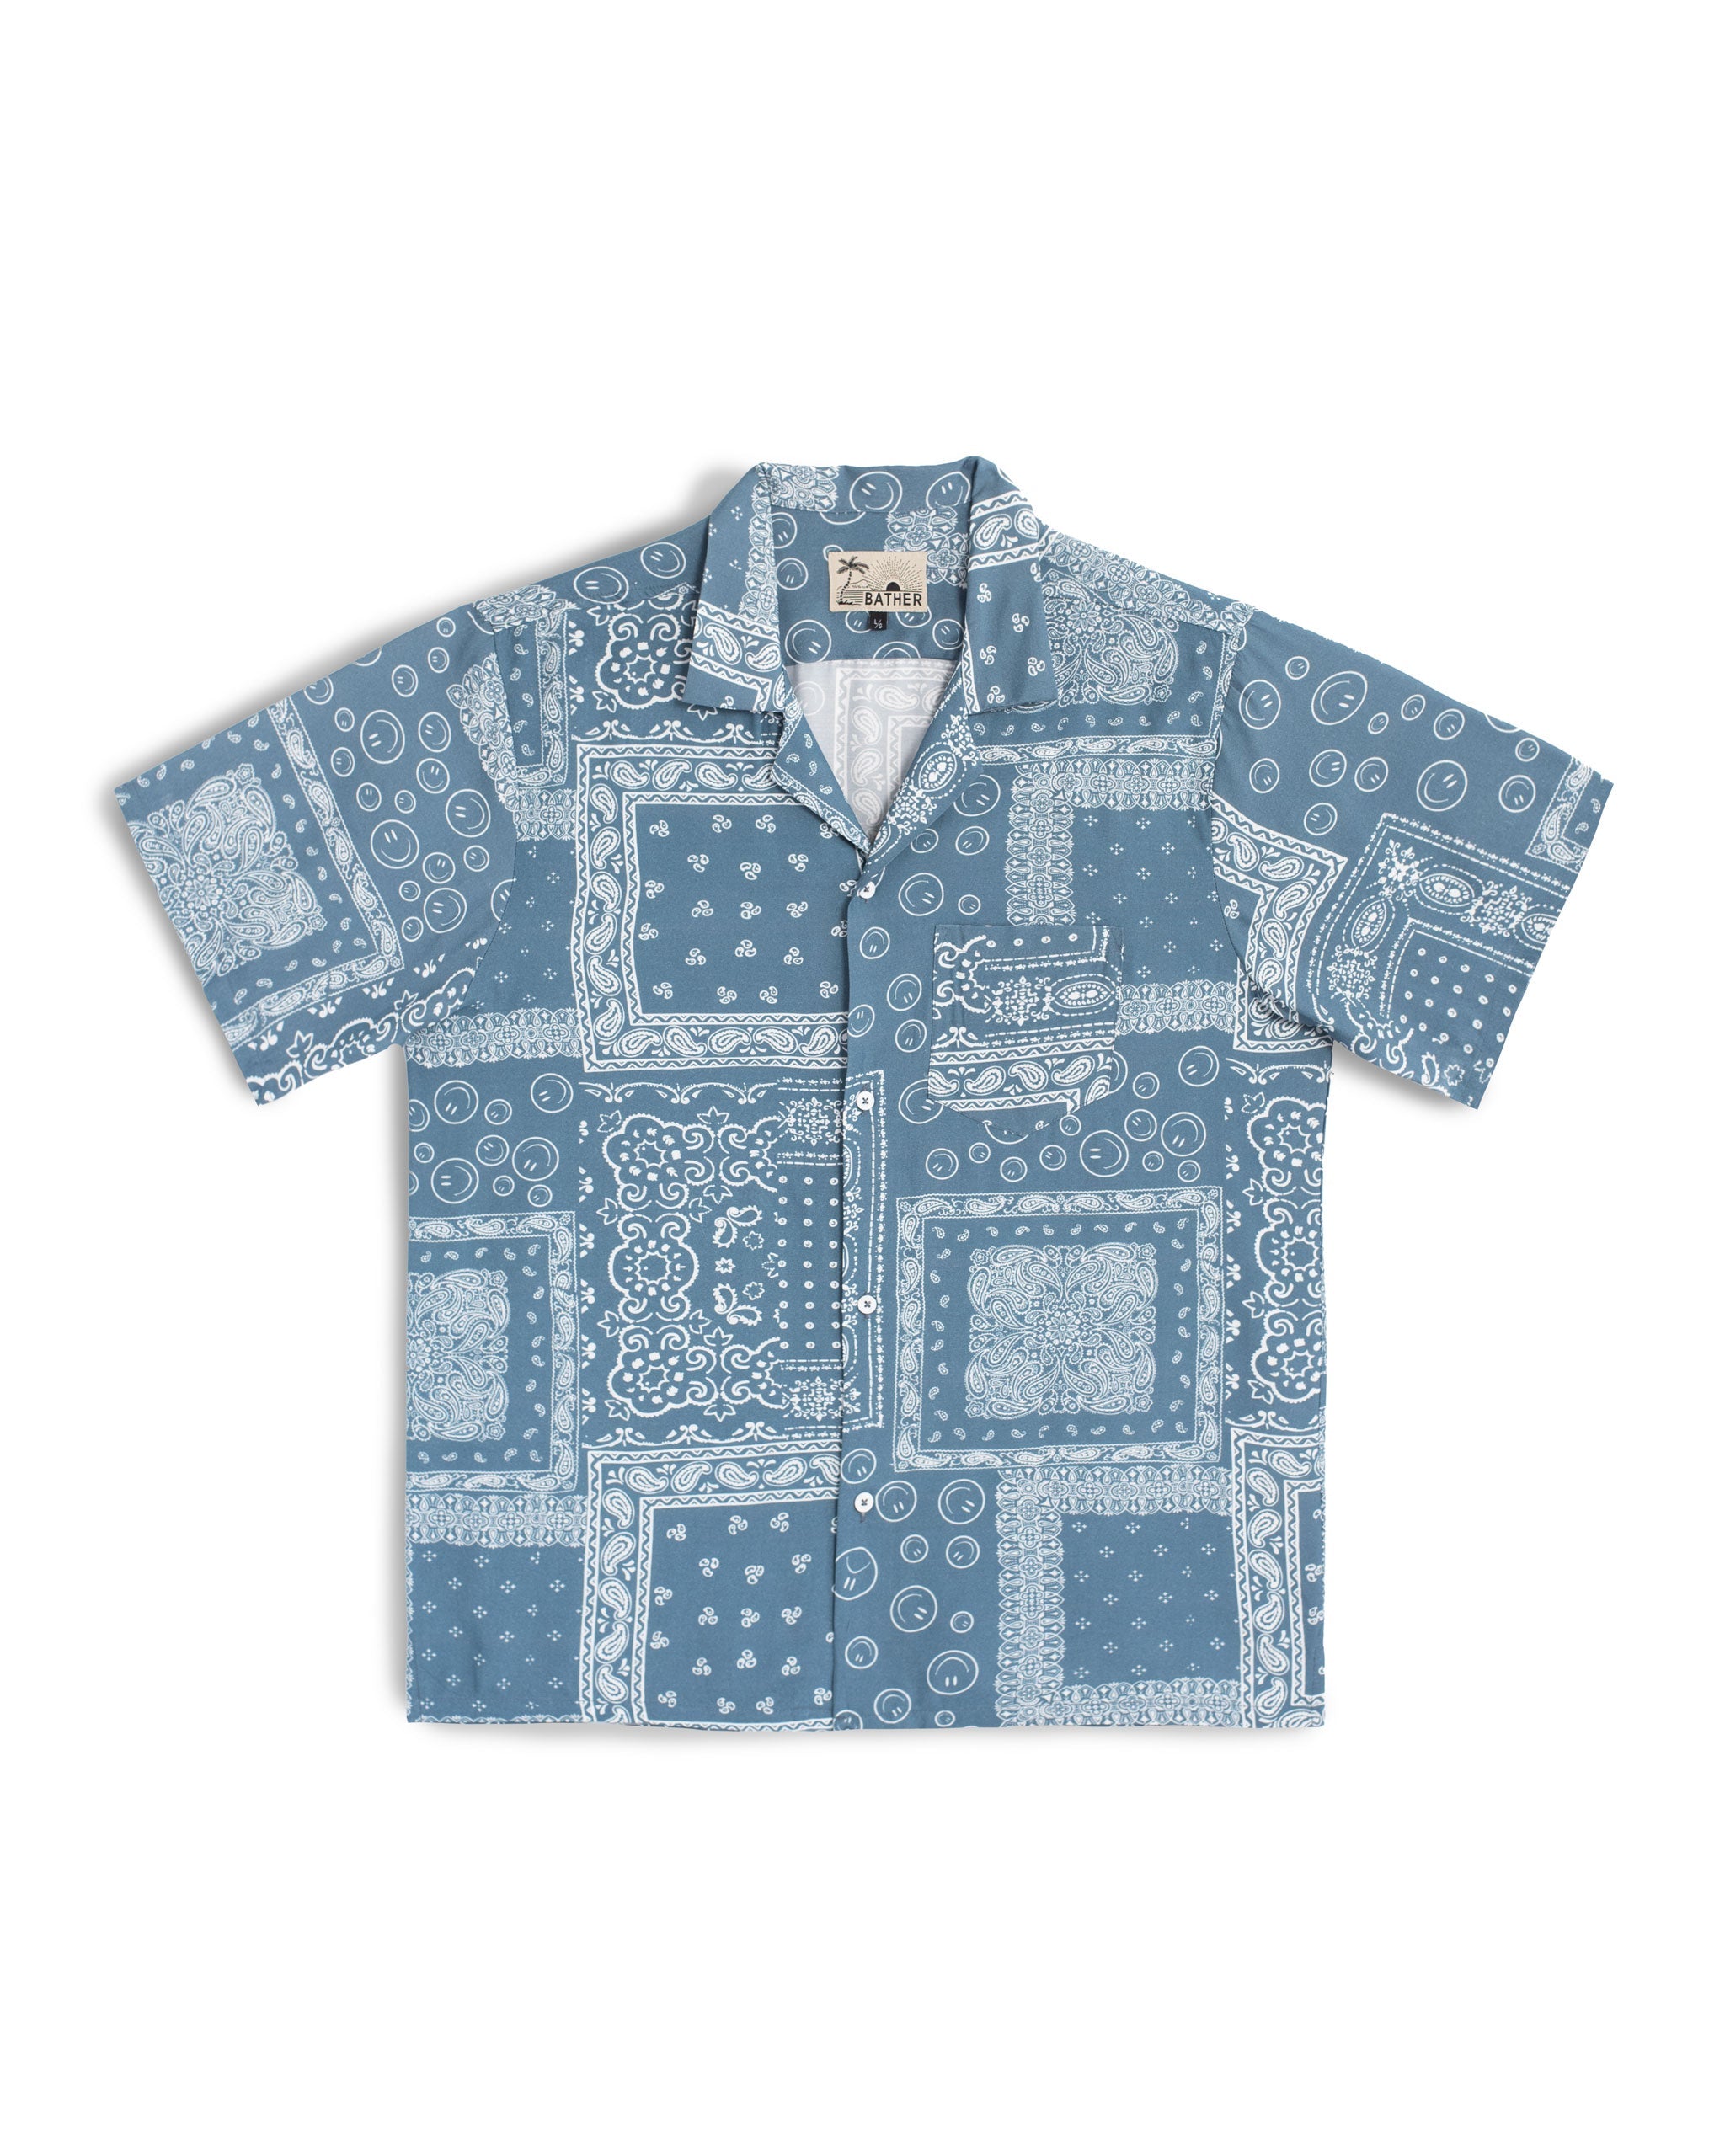 Blue camp shirt with all-over bandana print